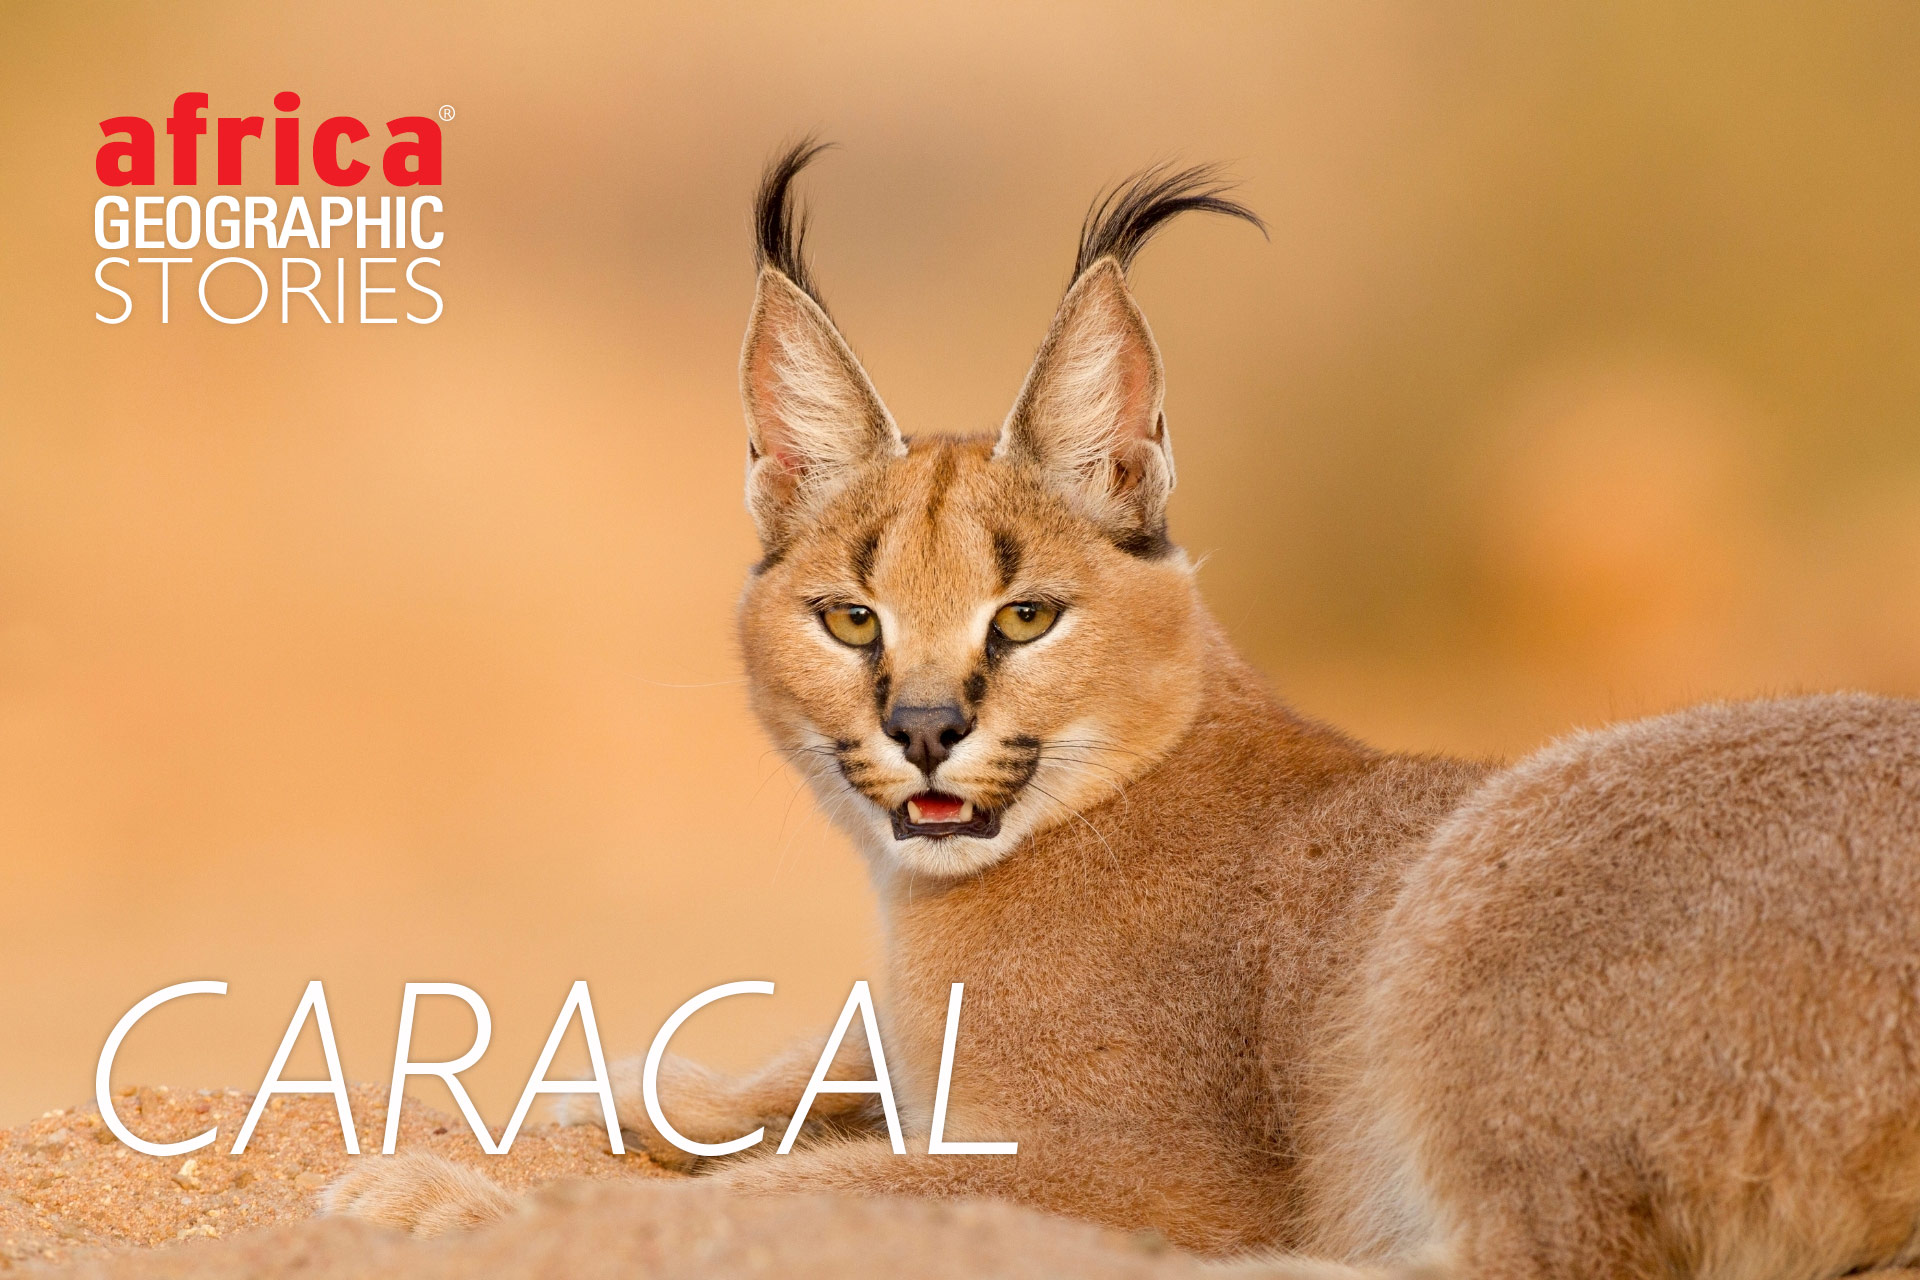 Caracal - Africa's deadly beauty - Africa Geographic